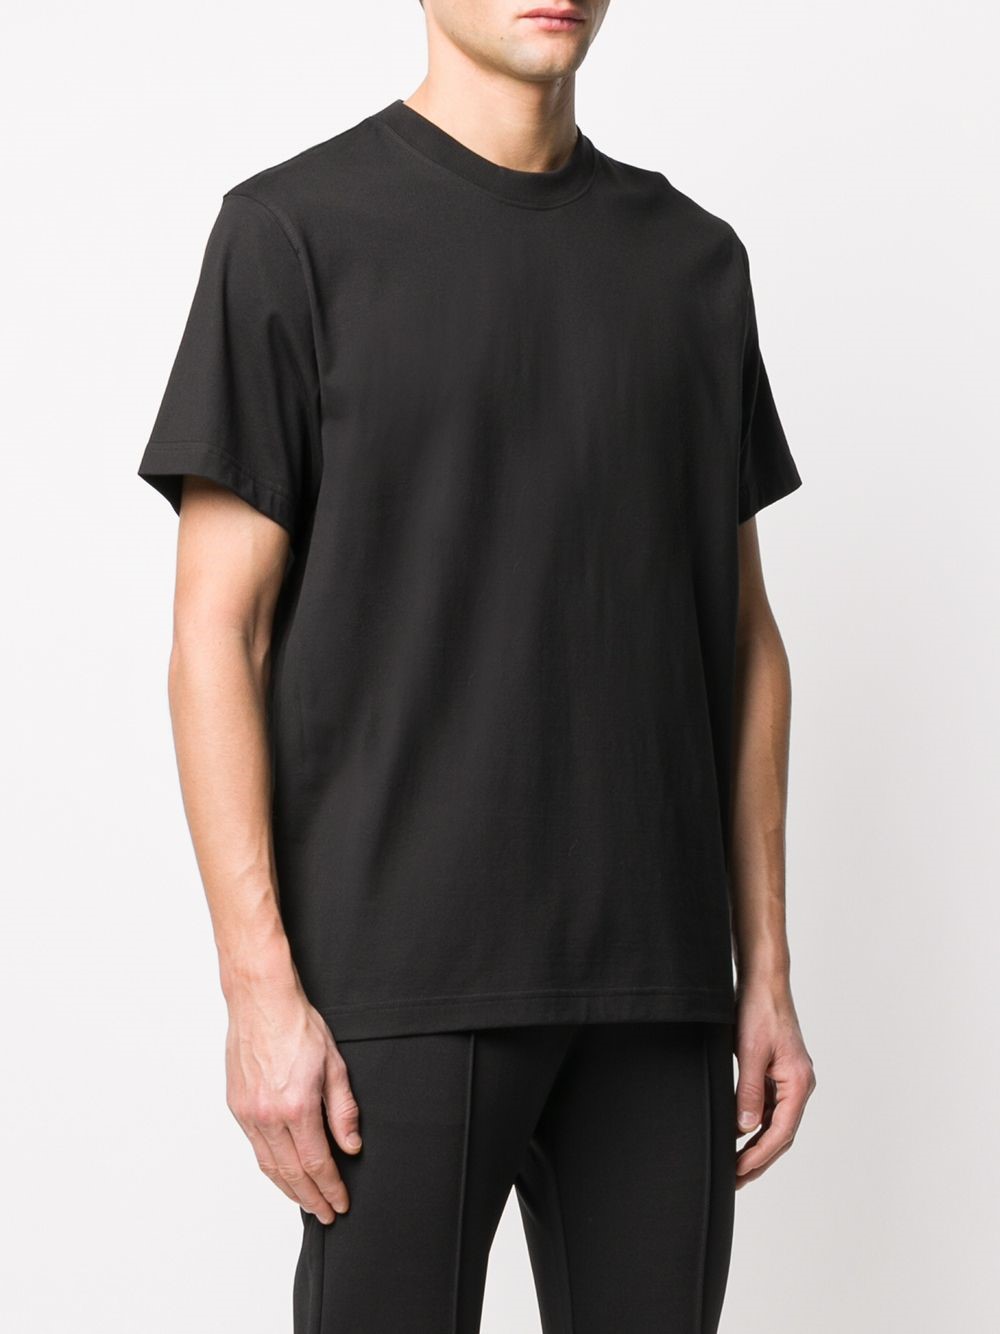 y-3 T-SHIRT available on montiboutique.com - 32542